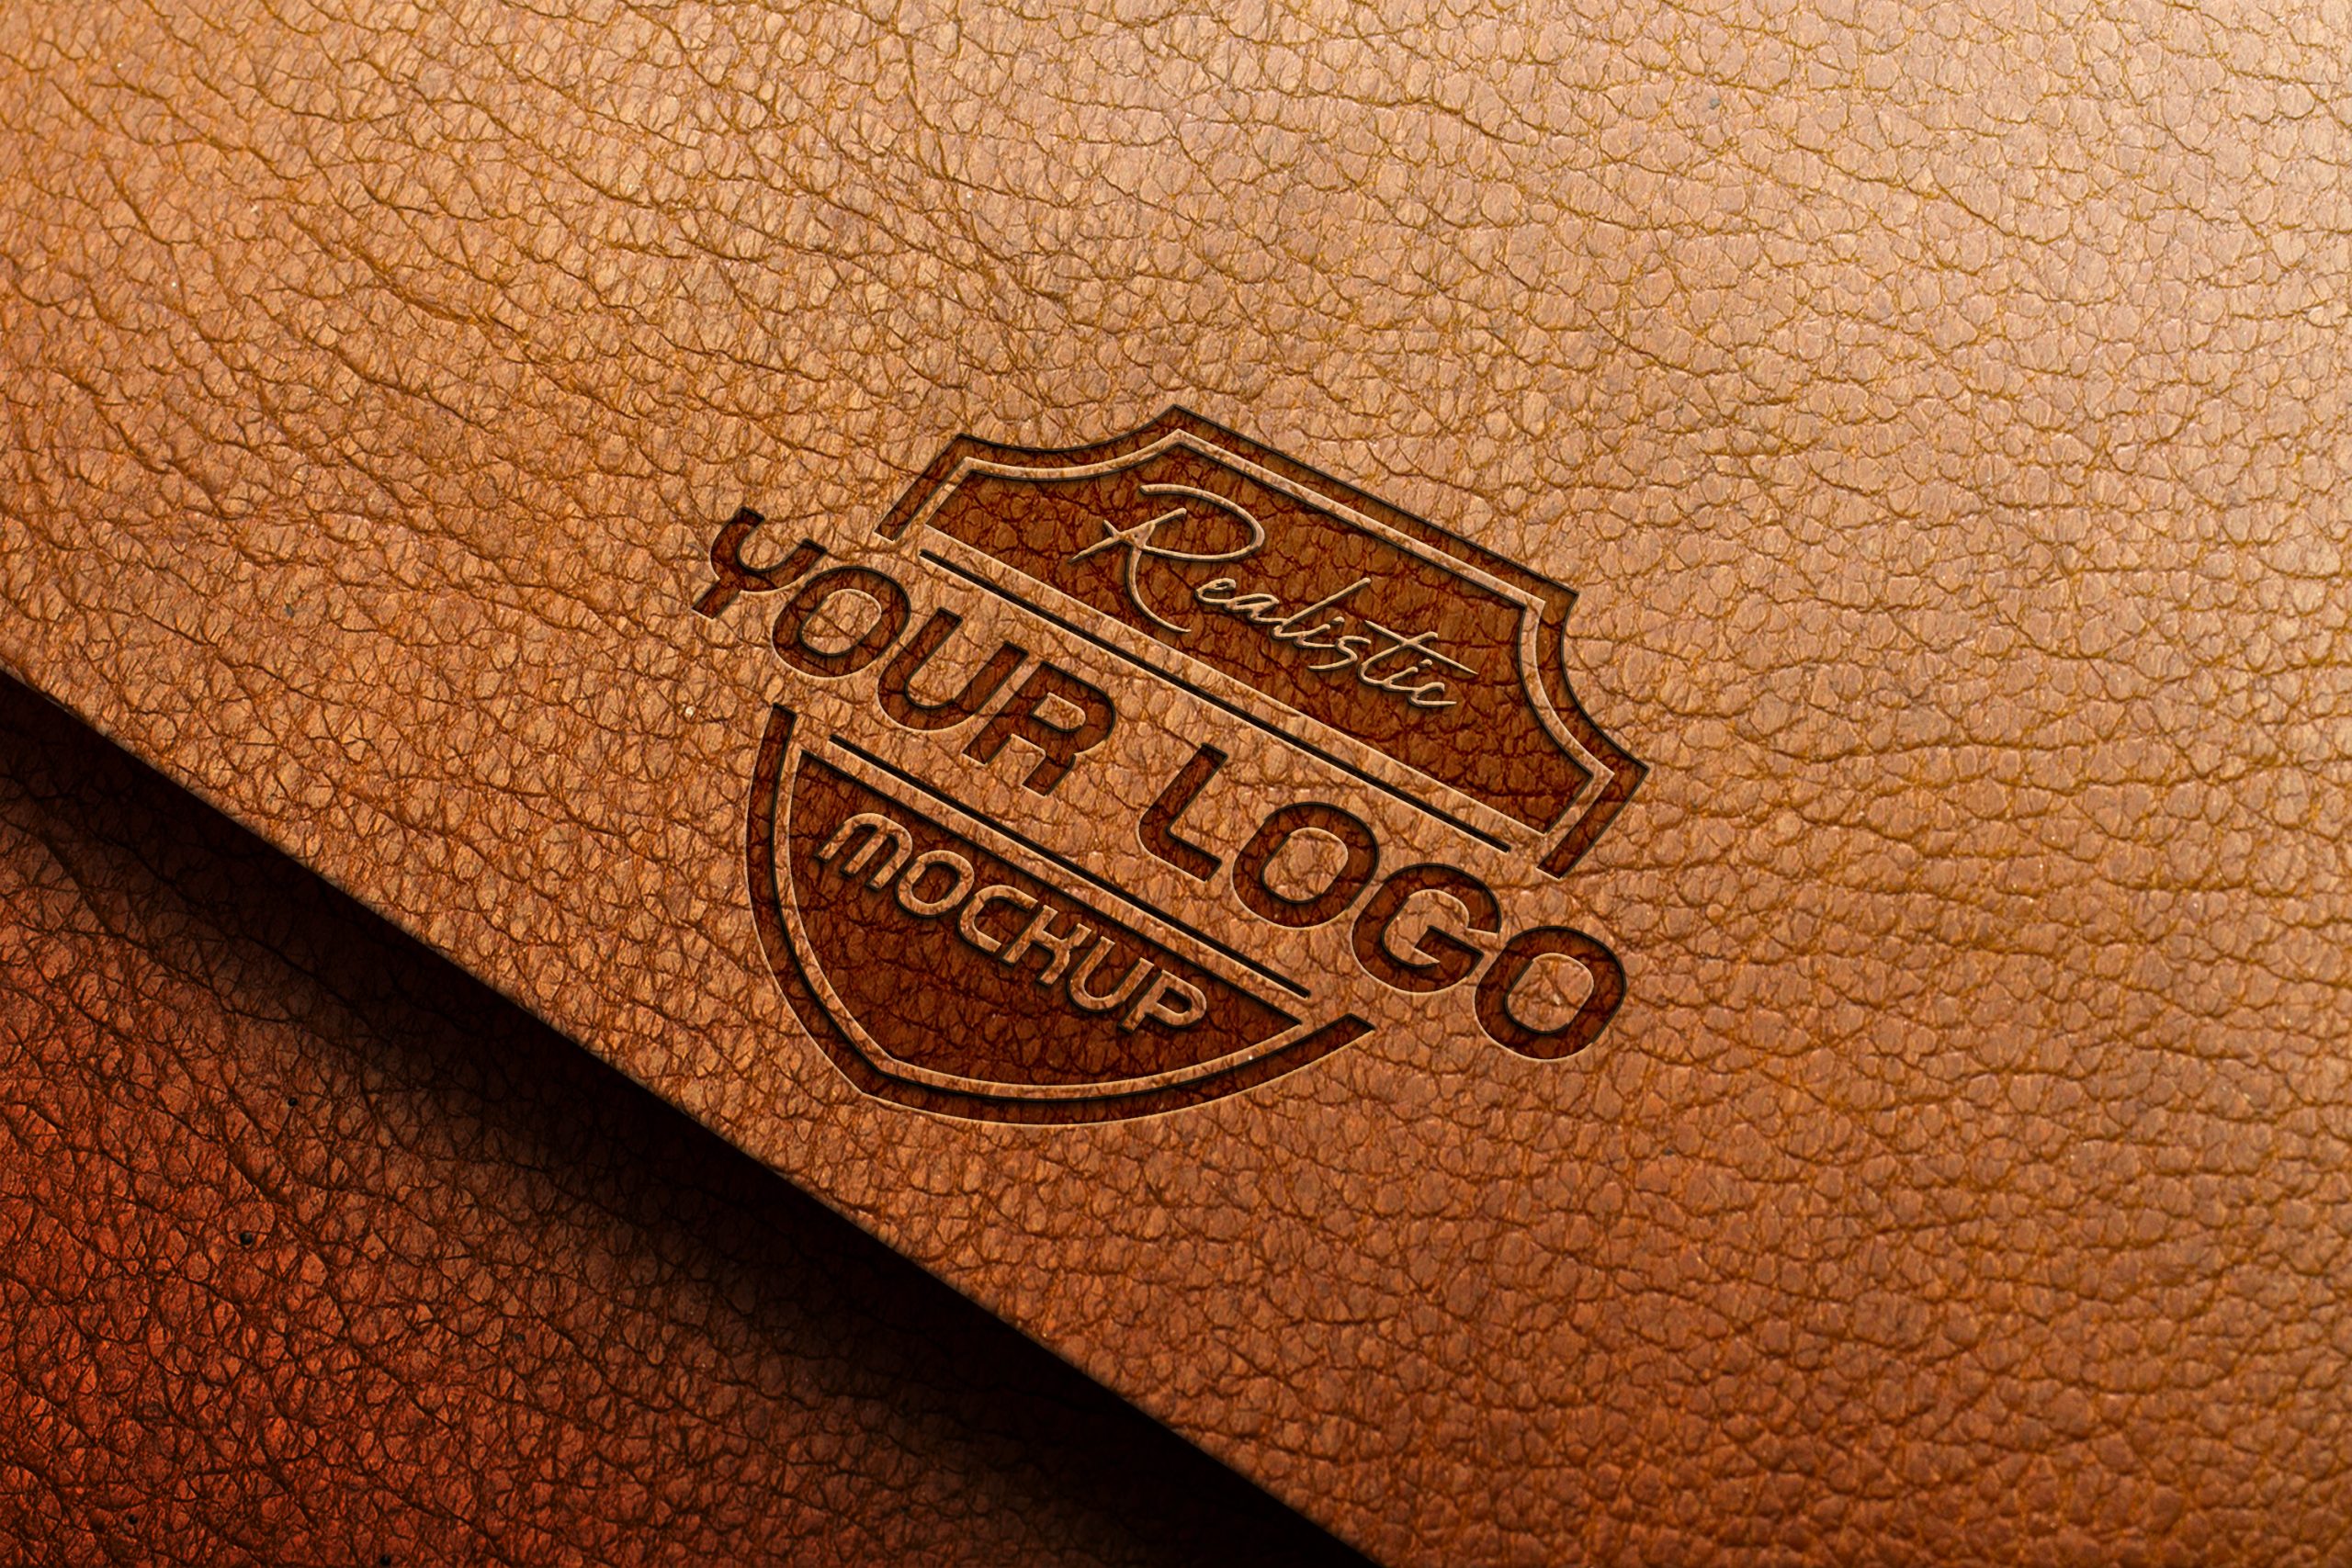 Genuine leather - www.leather-dictionary.com - The Leather Dictionary